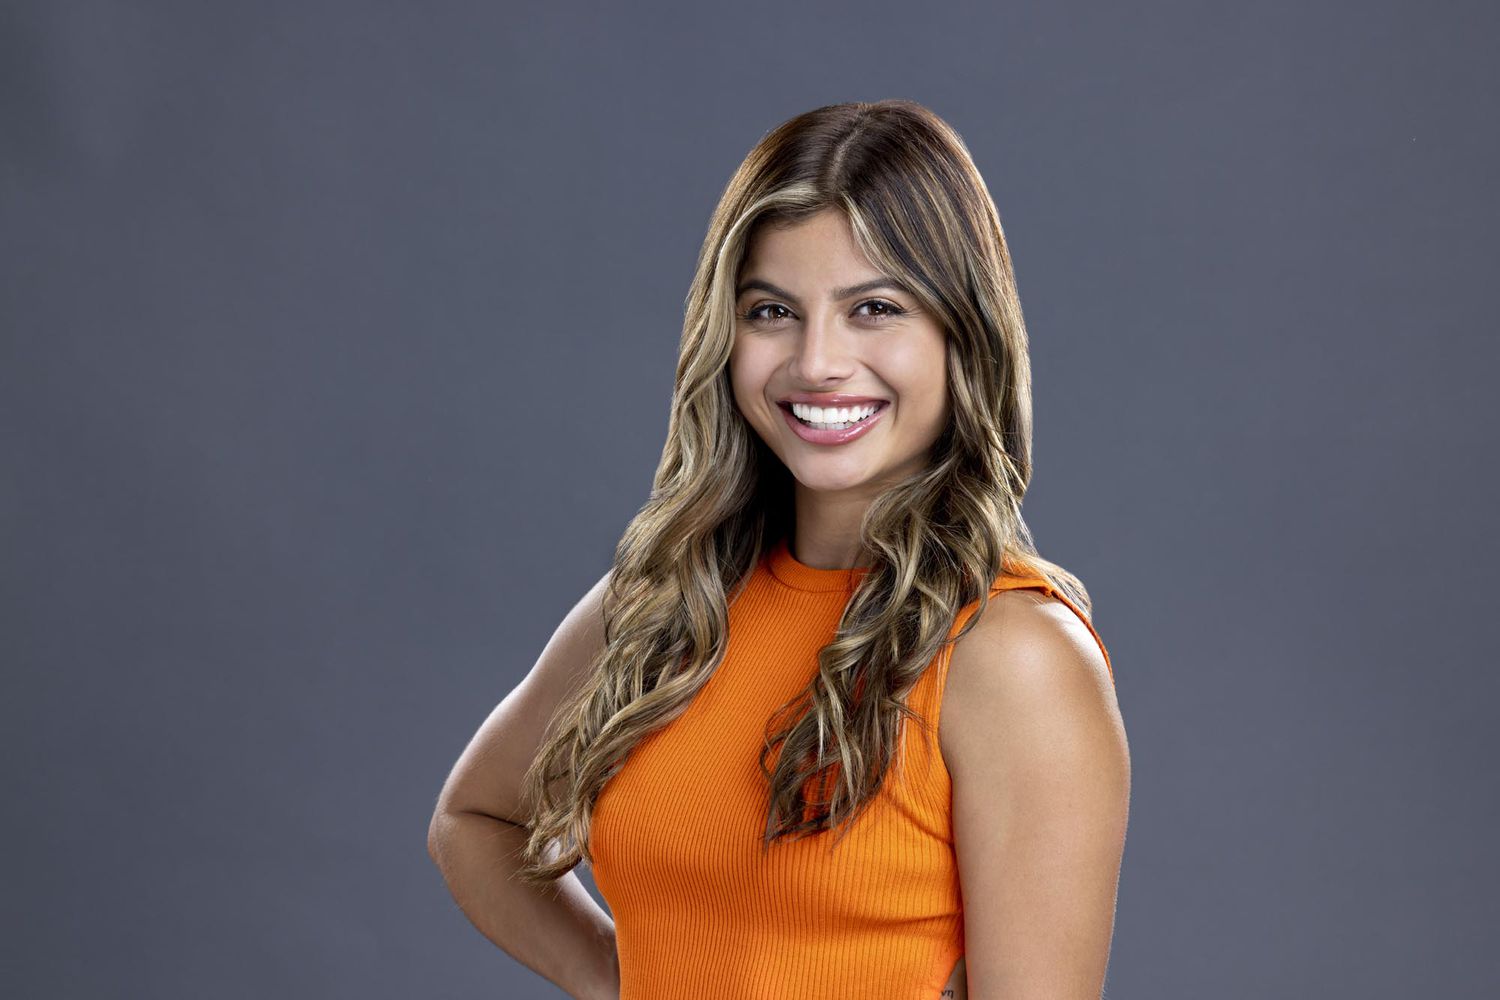 Paloma Aguilar self-evicts from the 'Big Brother' house